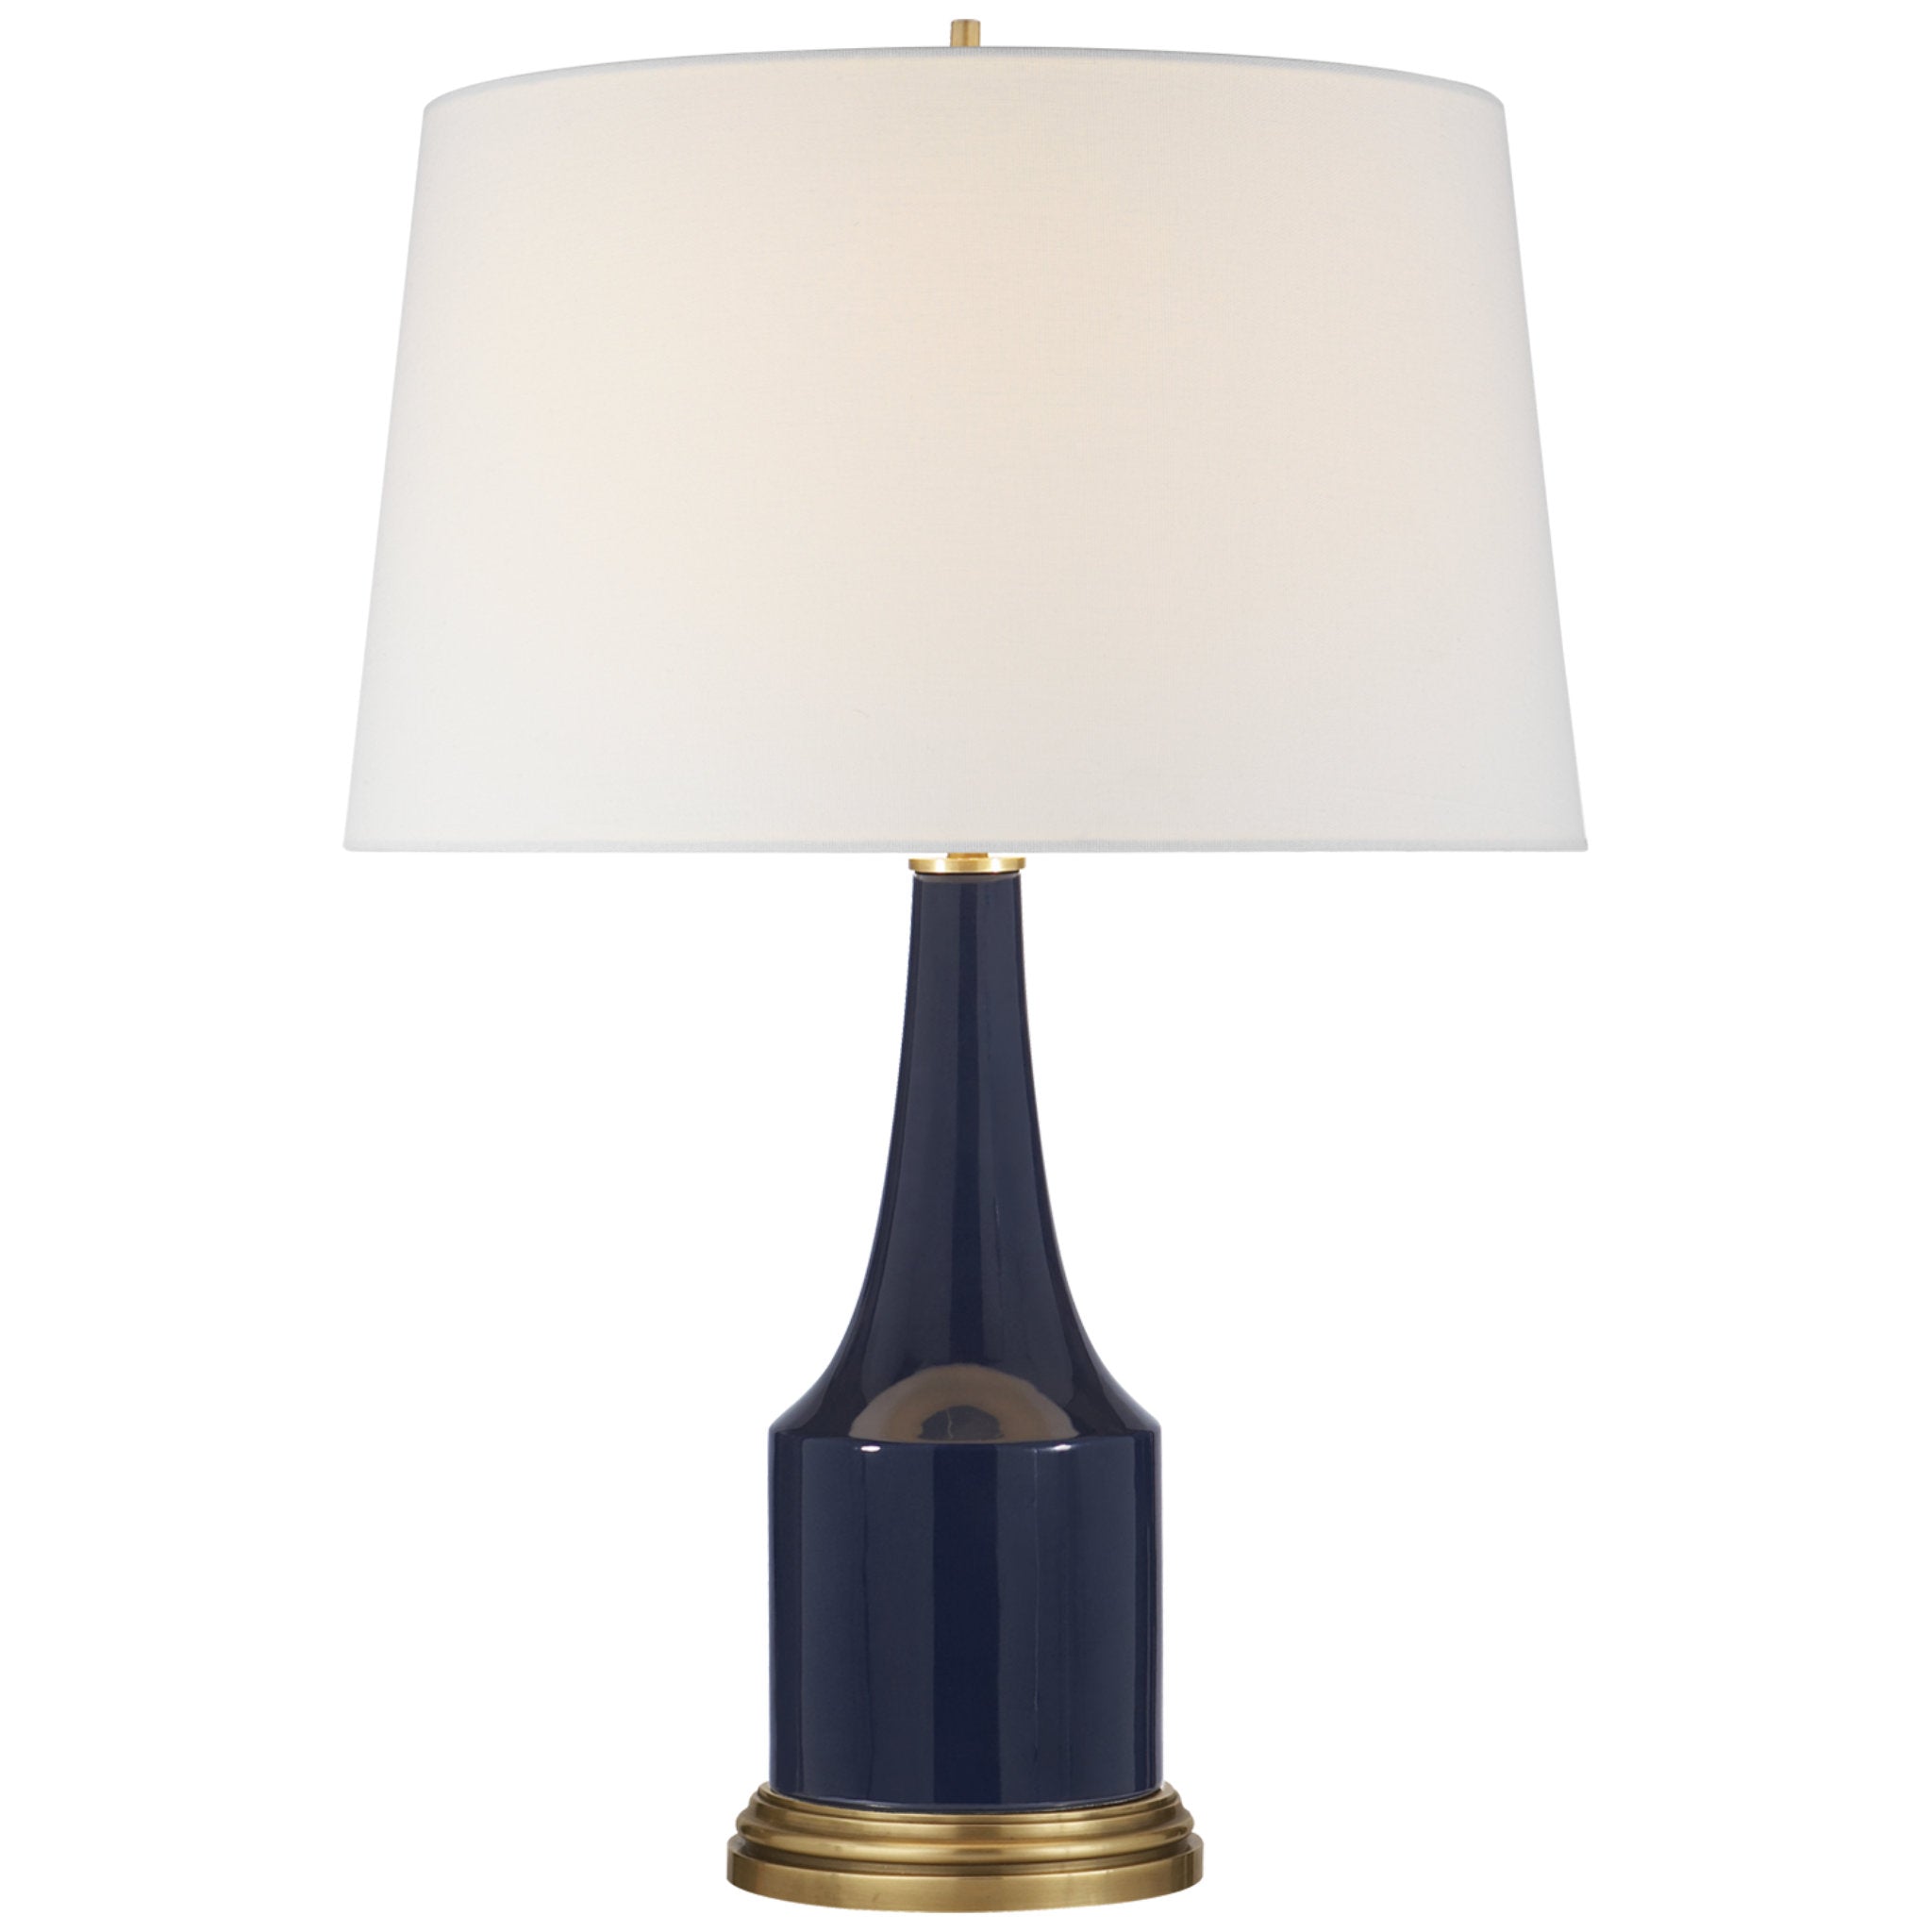 Alexa Hampton Sawyer Table Lamp in Midnight Blue Porcelain with Linen Shade